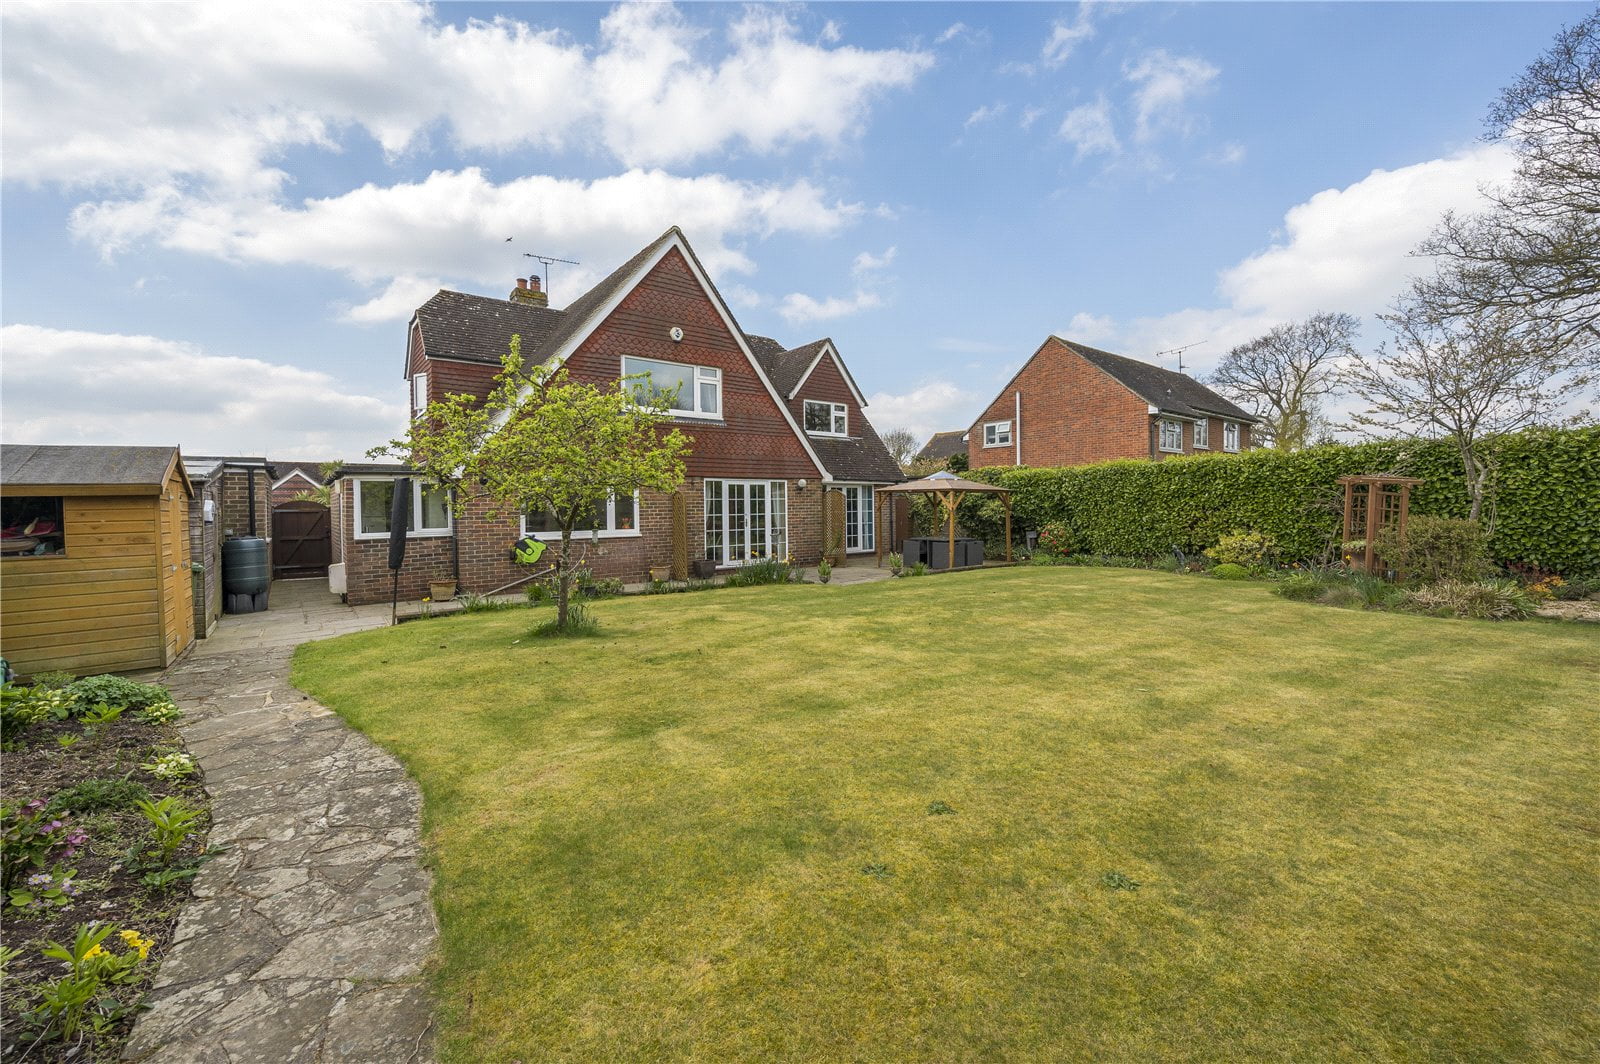 Orchard Dell, West Chiltington, West Sussex,  | residential-sales